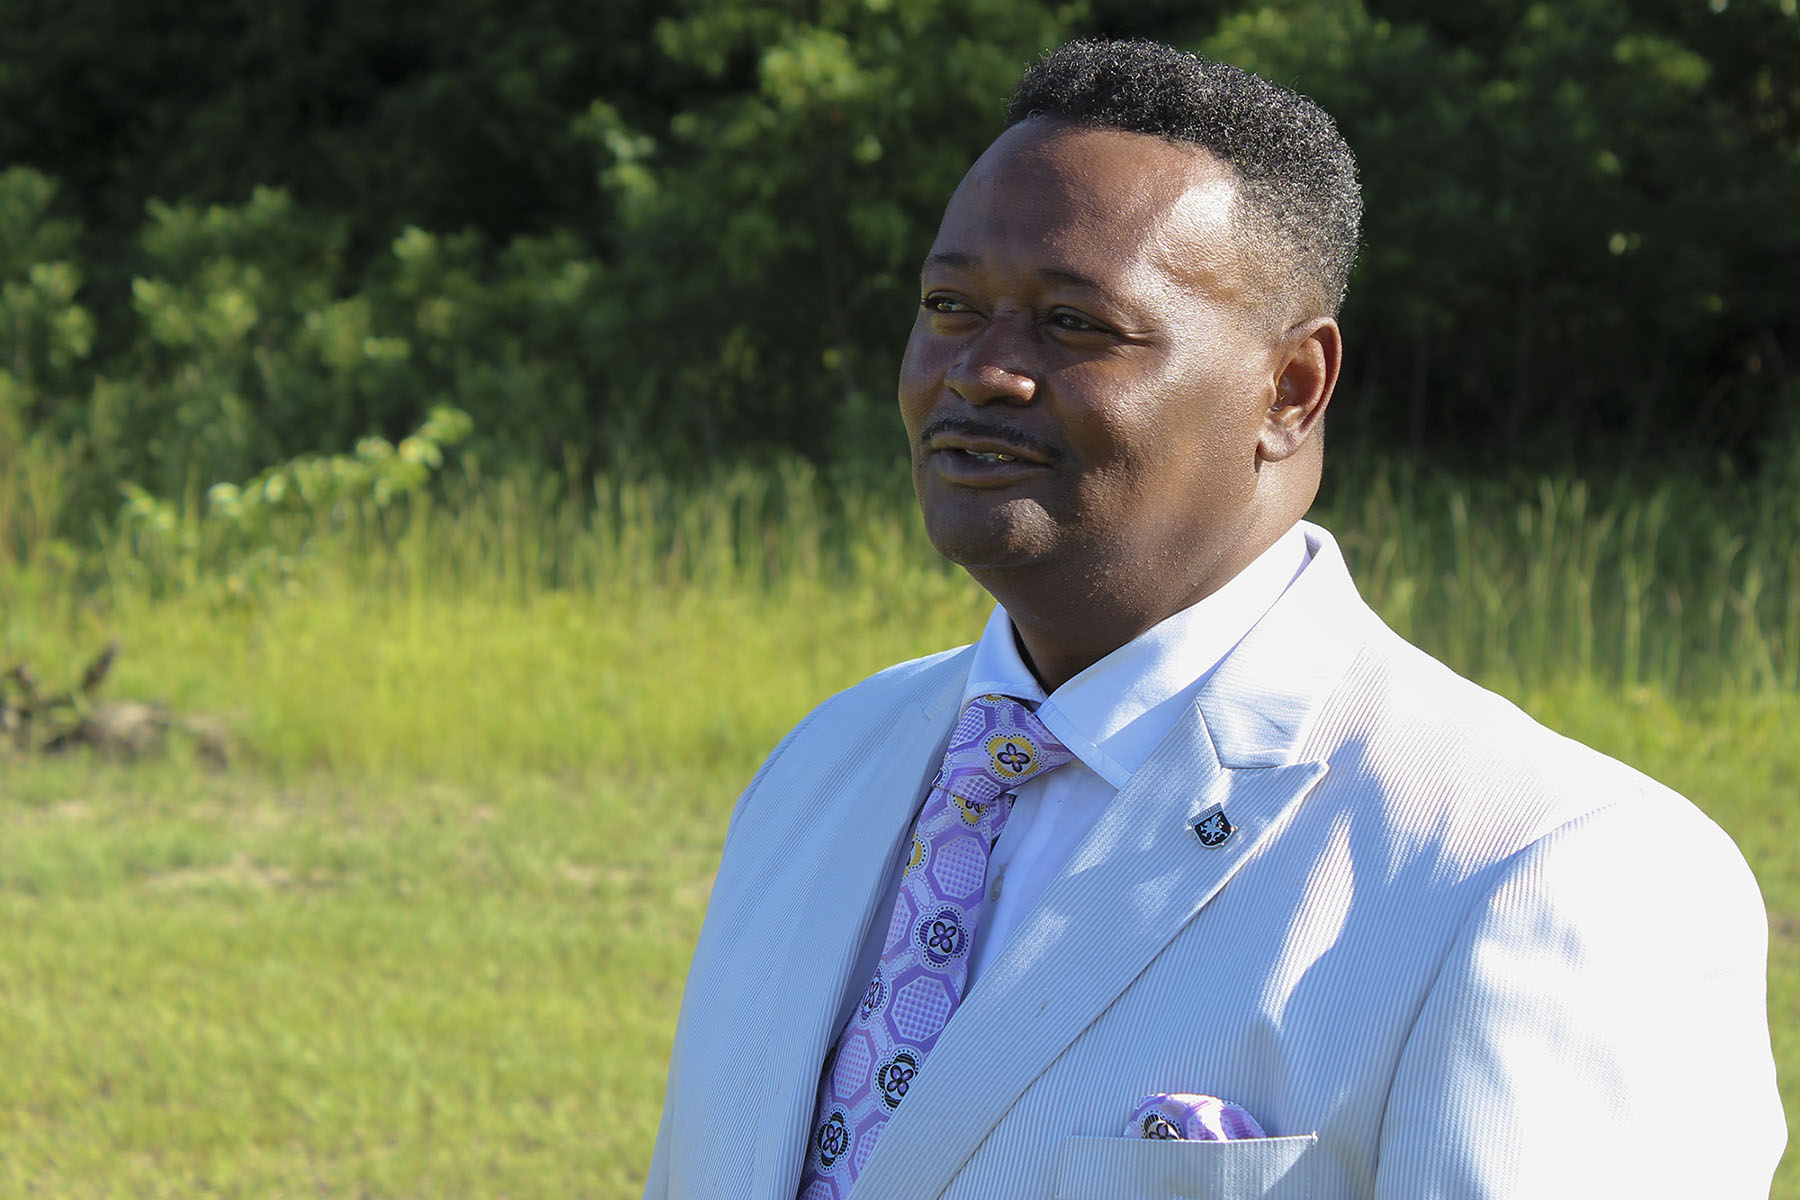 Clayton, Alabama, Councilman Charles Beasley discusses voter participation and purging in Eufaula, Alabama, before getting ready to perform with his gospel singing group at Eufaula Church of God in Christ. (Photo and audio by Phillip Jackson/News21)